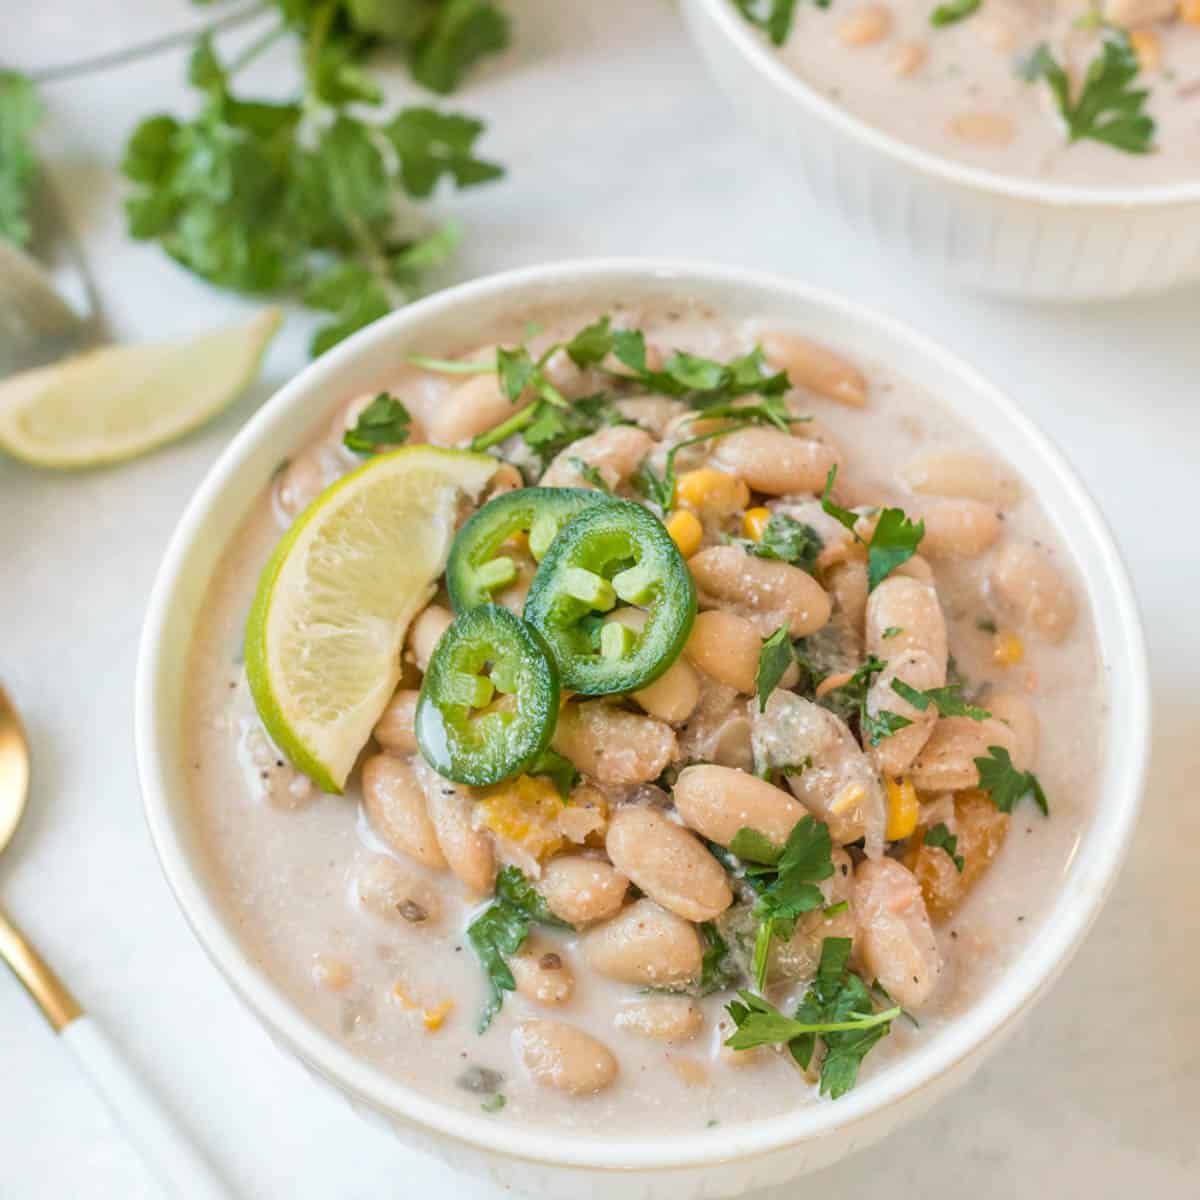 https://happyfoodhealthylife.com/wp-content/uploads/2022/01/White-Bean-Soup-Instant-Pot-square.jpg